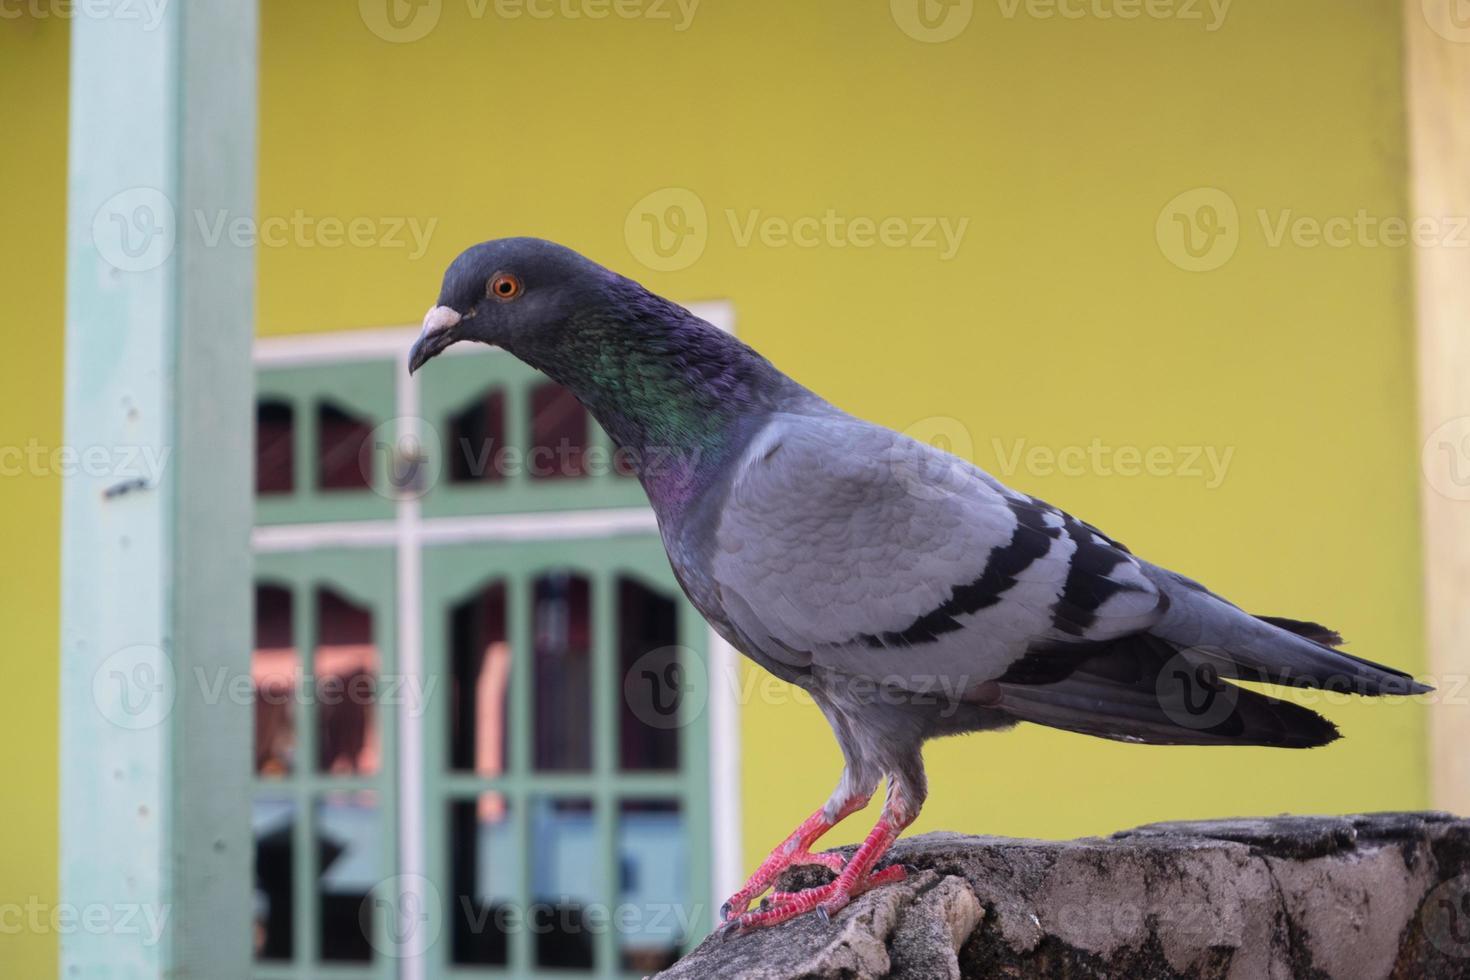 Indian Pigeon OR Rock Dove - The rock dove, rock pigeon, or common pigeon is a member of the bird family Columbidae. In common usage, this bird is often simply referred to as the pigeon photo